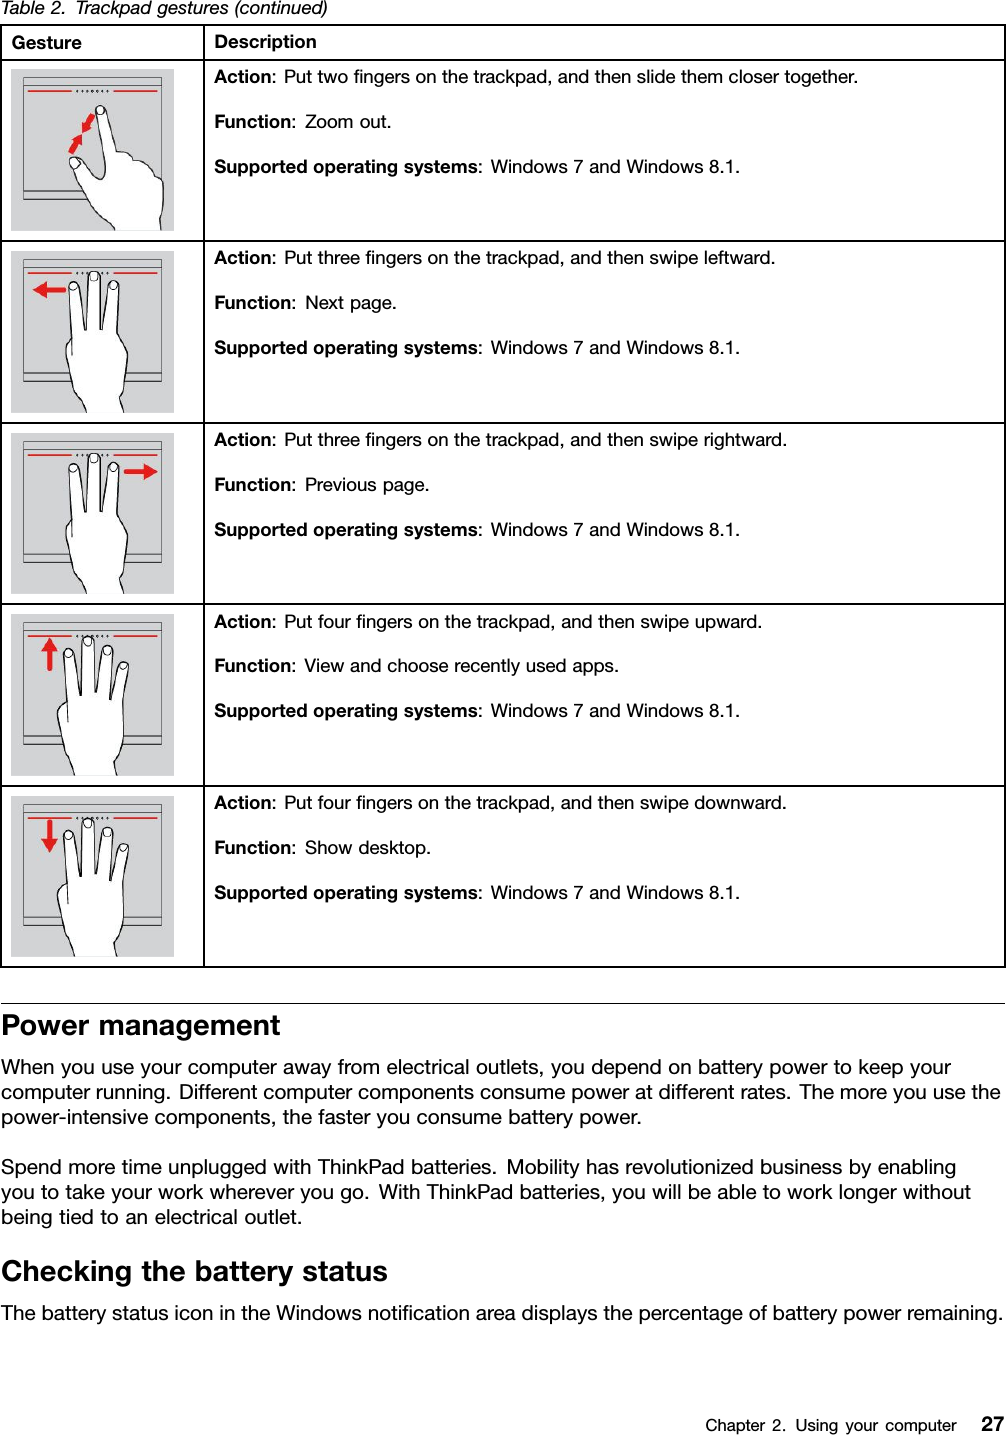 Table 2. Trackpad gestures (continued)Gesture DescriptionAction: Put two ﬁngers on the trackpad, and then slide them closer together.Function: Zoom out.Supported operating systems: Windows 7 and Windows 8.1.Action: Put three ﬁngers on the trackpad, and then swipe leftward.Function: Next page.Supported operating systems: Windows 7 and Windows 8.1.Action: Put three ﬁngers on the trackpad, and then swipe rightward.Function: Previous page.Supported operating systems: Windows 7 and Windows 8.1.Action: Put four ﬁngers on the trackpad, and then swipe upward.Function: View and choose recently used apps.Supported operating systems: Windows 7 and Windows 8.1.Action: Put four ﬁngers on the trackpad, and then swipe downward.Function: Show desktop.Supported operating systems: Windows 7 and Windows 8.1.Power managementWhen you use your computer away from electrical outlets, you depend on battery power to keep yourcomputer running. Different computer components consume power at different rates. The more you use thepower-intensive components, the faster you consume battery power.Spend more time unplugged with ThinkPad batteries. Mobility has revolutionized business by enablingyou to take your work wherever you go. With ThinkPad batteries, you will be able to work longer withoutbeing tied to an electrical outlet.Checking the battery statusThe battery status icon in the Windows notiﬁcation area displays the percentage of battery power remaining.Chapter 2.Using your computer 27